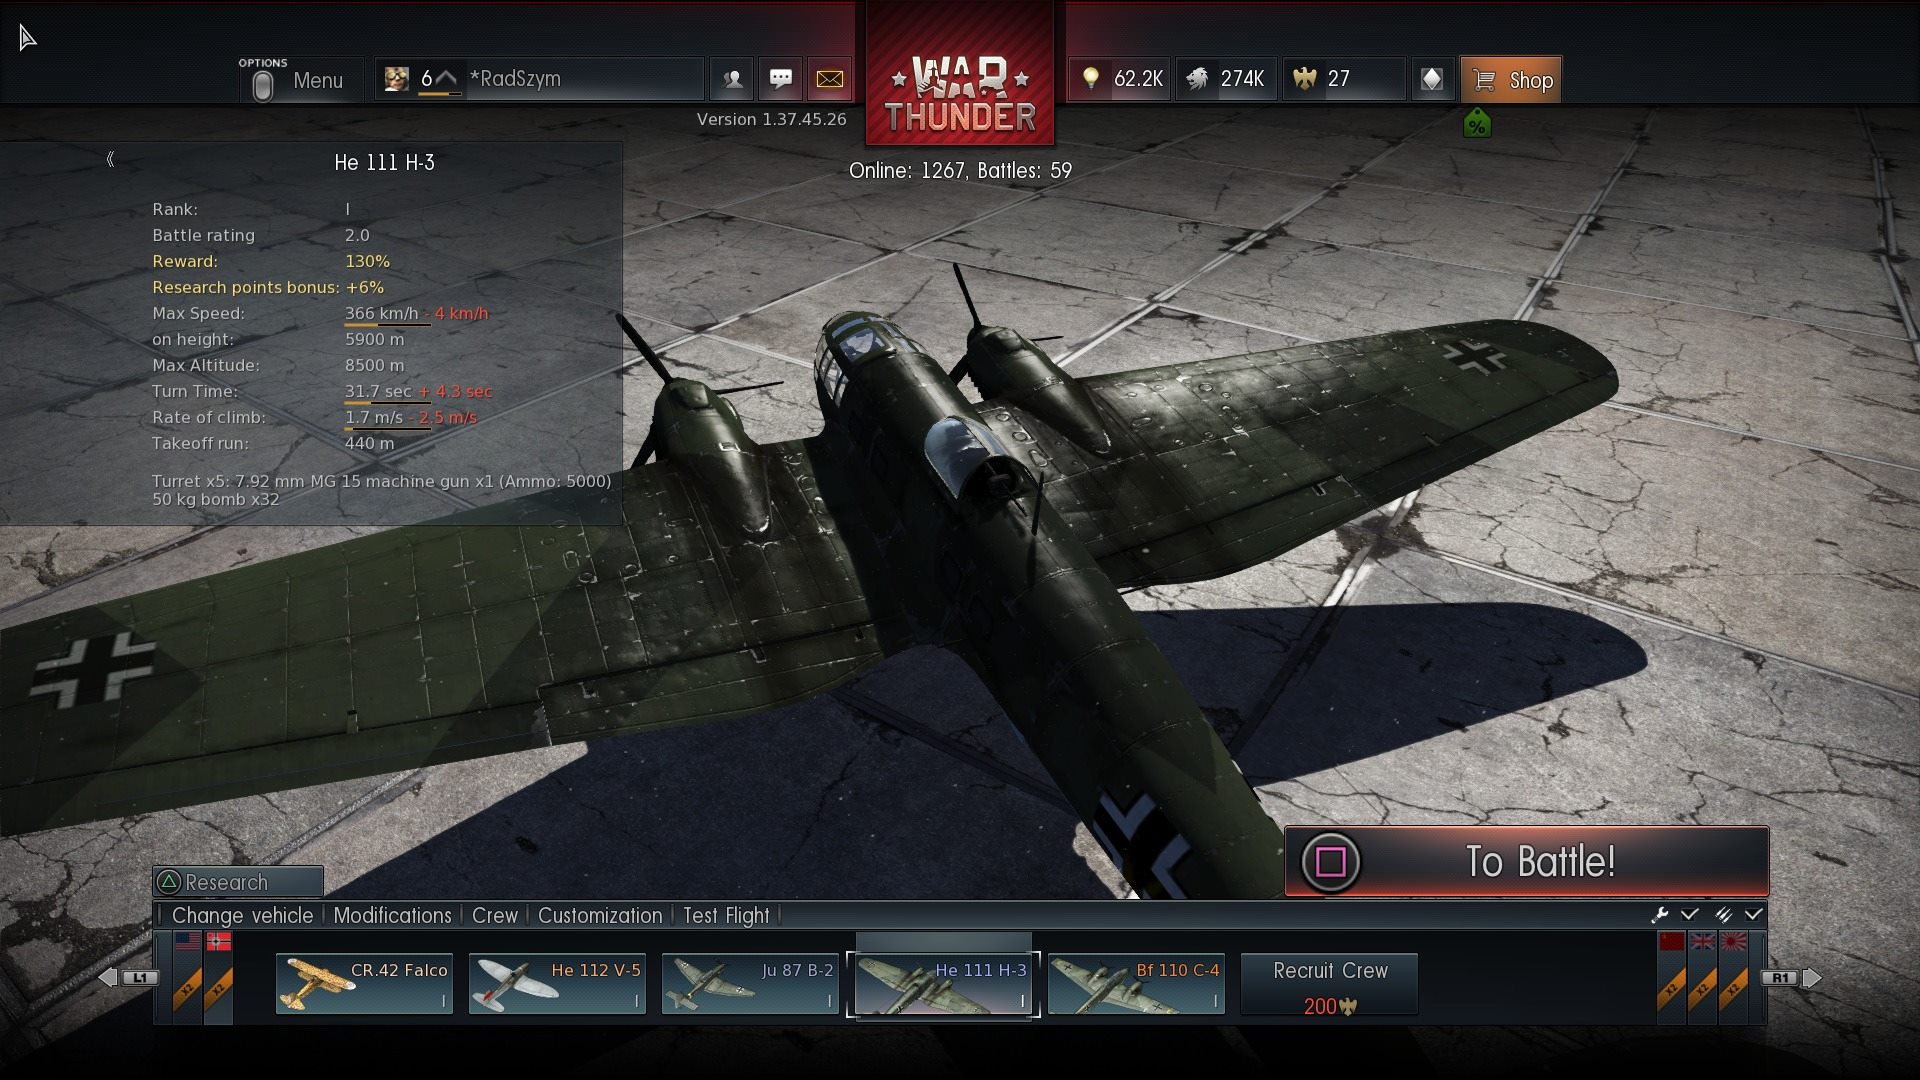 war thunder ps4 account to pc